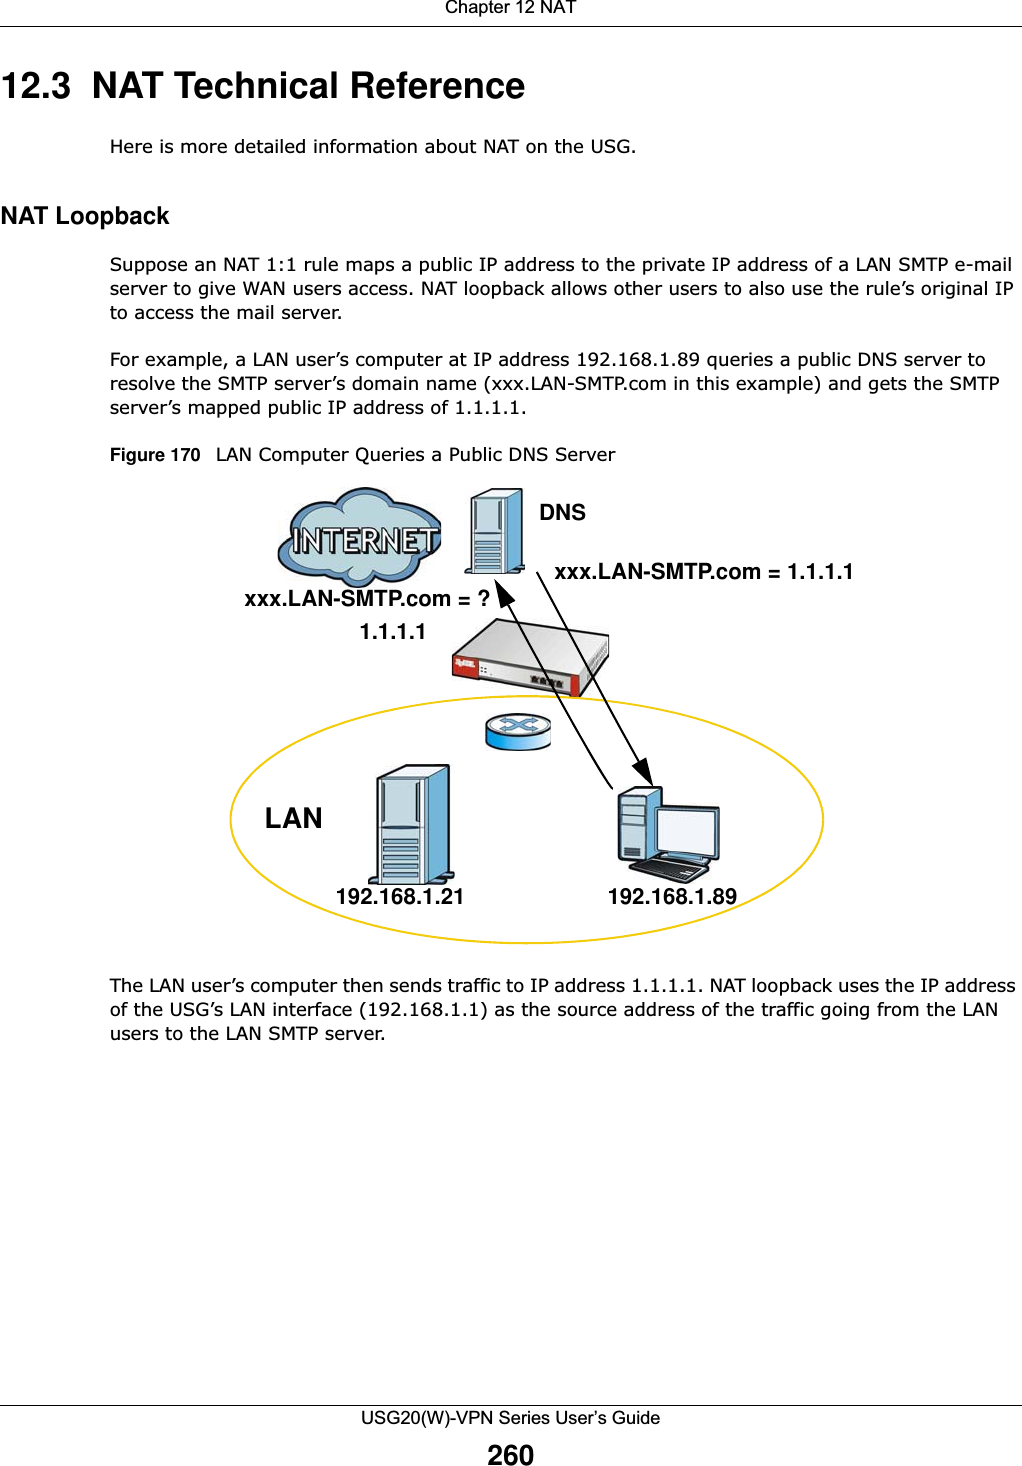 Chapter 12 NATUSG20(W)-VPN Series User’s Guide26012.3  NAT Technical ReferenceHere is more detailed information about NAT on the USG.NAT LoopbackSuppose an NAT 1:1 rule maps a public IP address to the private IP address of a LAN SMTP e-mail server to give WAN users access. NAT loopback allows other users to also use the rule’s original IP to access the mail server. For example, a LAN user’s computer at IP address 192.168.1.89 queries a public DNS server to resolve the SMTP server’s domain name (xxx.LAN-SMTP.com in this example) and gets the SMTP server’s mapped public IP address of 1.1.1.1.Figure 170   LAN Computer Queries a Public DNS Server    The LAN user’s computer then sends traffic to IP address 1.1.1.1. NAT loopback uses the IP address of the USG’s LAN interface (192.168.1.1) as the source address of the traffic going from the LAN users to the LAN SMTP server. 192.168.1.21xxx.LAN-SMTP.com = ?LANDNS192.168.1.89xxx.LAN-SMTP.com = 1.1.1.11.1.1.1